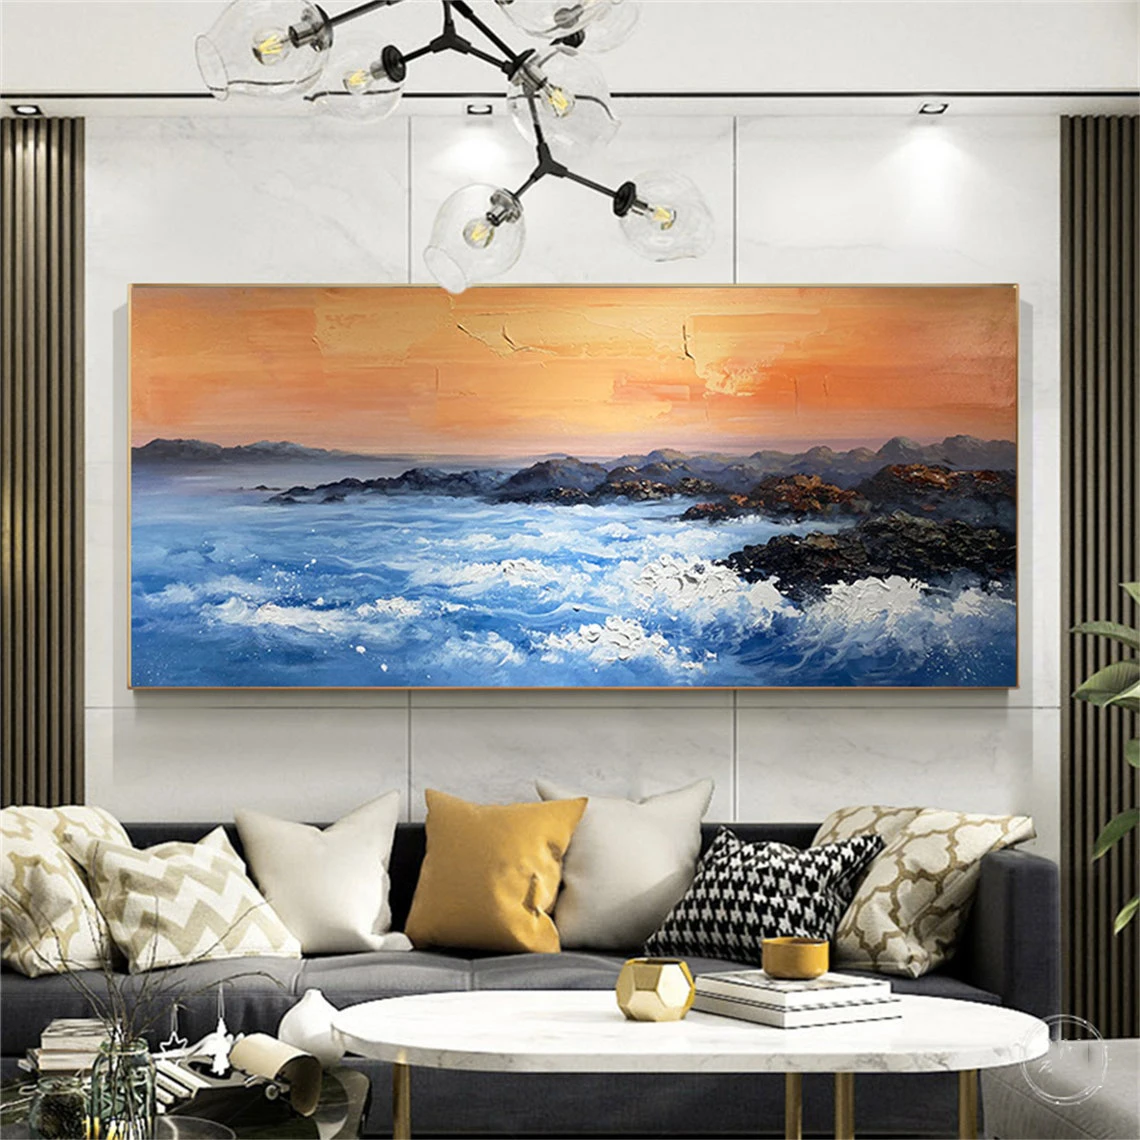 

Blue Sea Wave Abstract Hand Painted Oil Painting Wall Art Wall Decor Orange Texture Acrylic Seascape Artwrok For Home Decoration